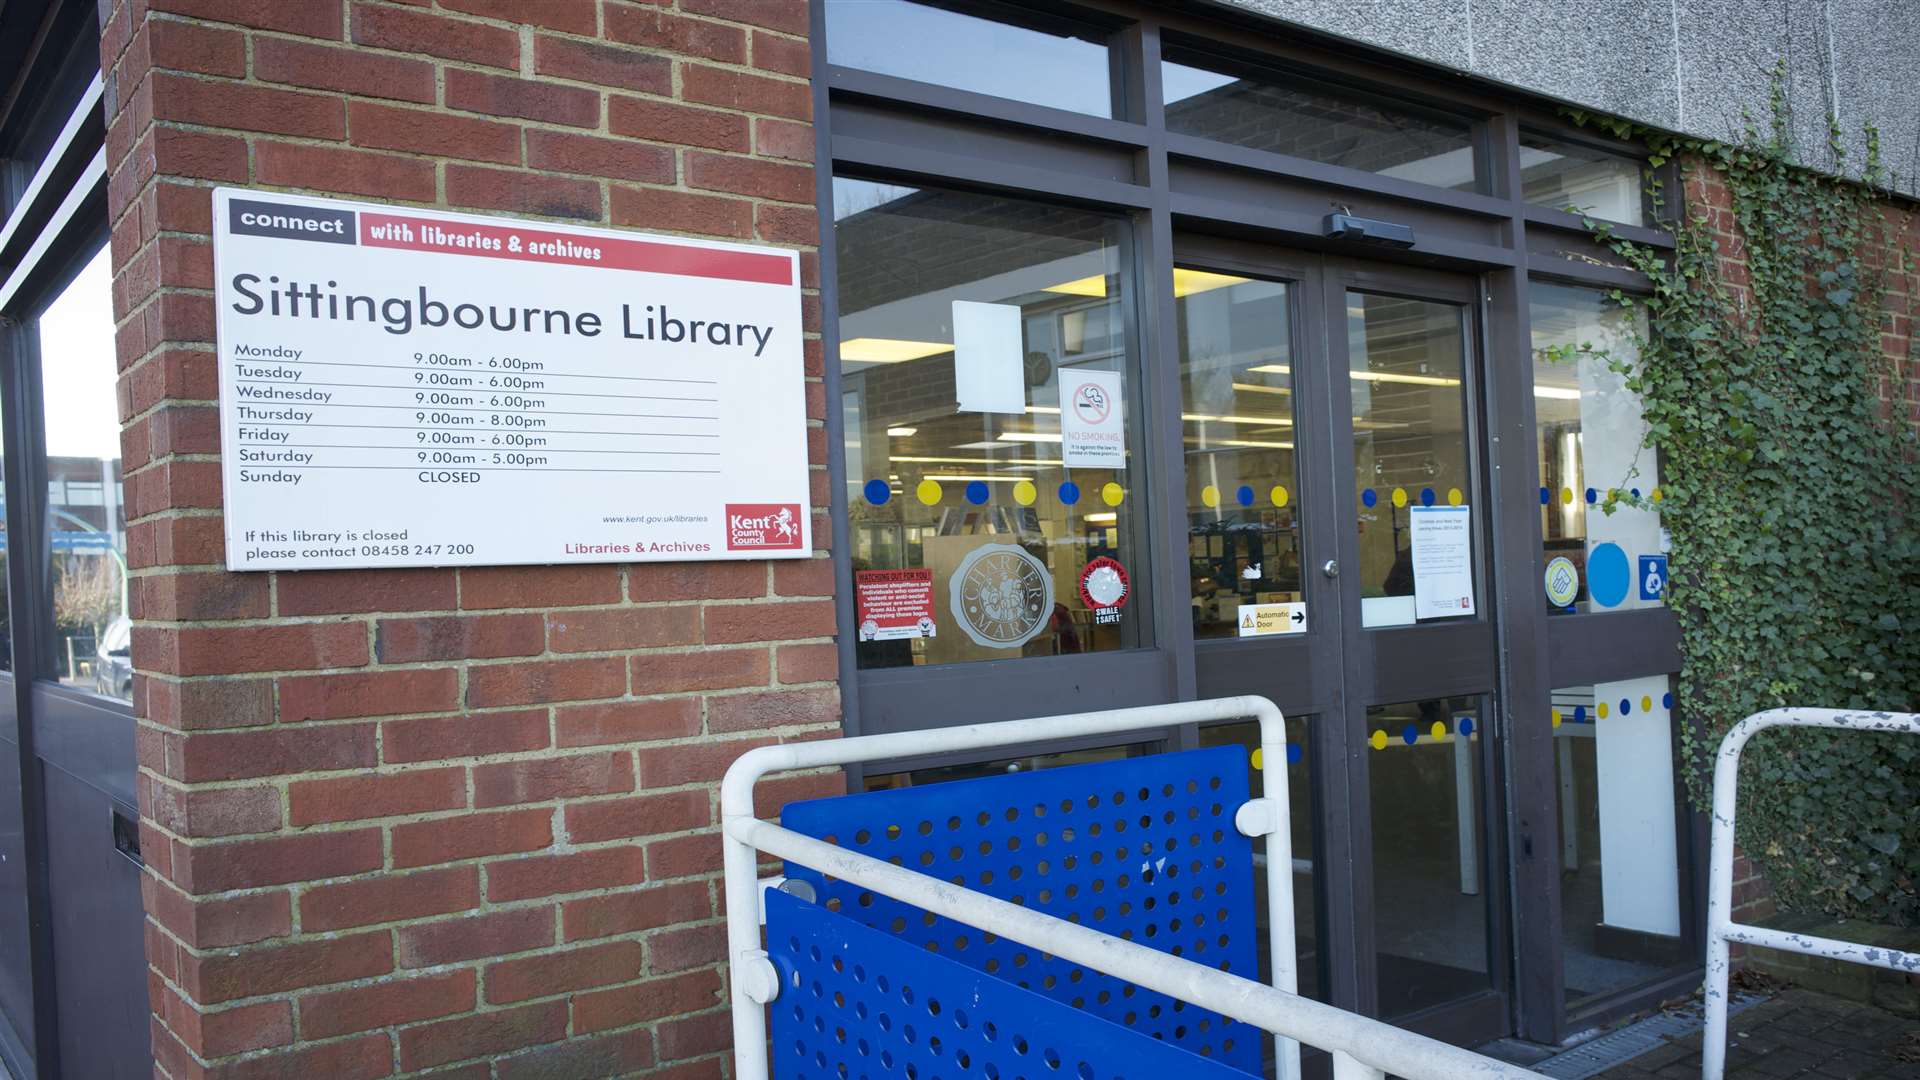 Sittingbourne library will close its doors to the public for nine weeks to allow work to be carried out